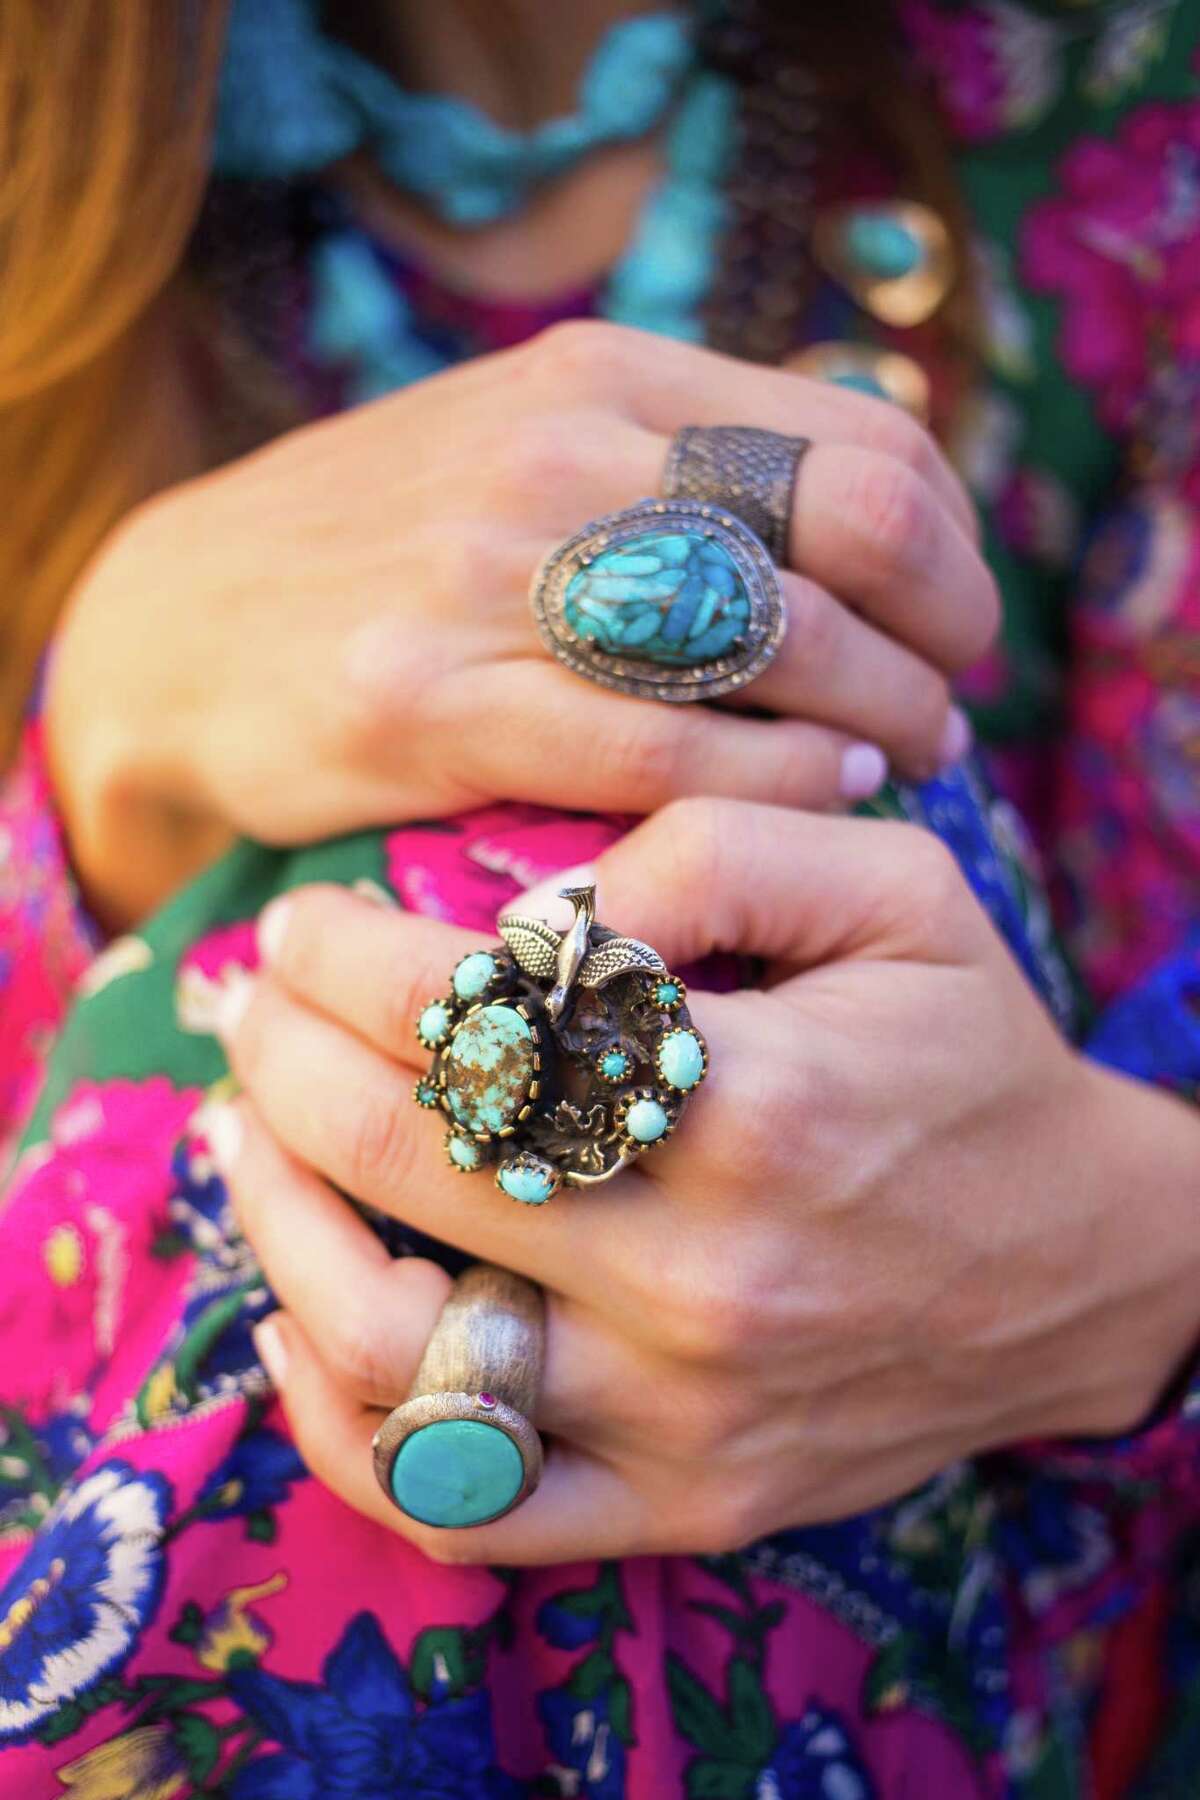 RODEO FASHION: Dress from Anthropologie - $228. Squash blossom necklace - $1,800, Seeping Beauty turquoise necklaces (sheÂ?’s wearing two of the same necklace) - $300 each,Â  Turquoise tassel earrings - $35,Â Â  RINGS (from top to bottom in photo)Â  Champagne diamond cigar band - $600, Turquoise ring with diamond surround - $375, Turquoise ring with sterling silver bird - $342, andÂ  Turquoise and sterling silver ring - $225. All from J. Landa in Rice Village